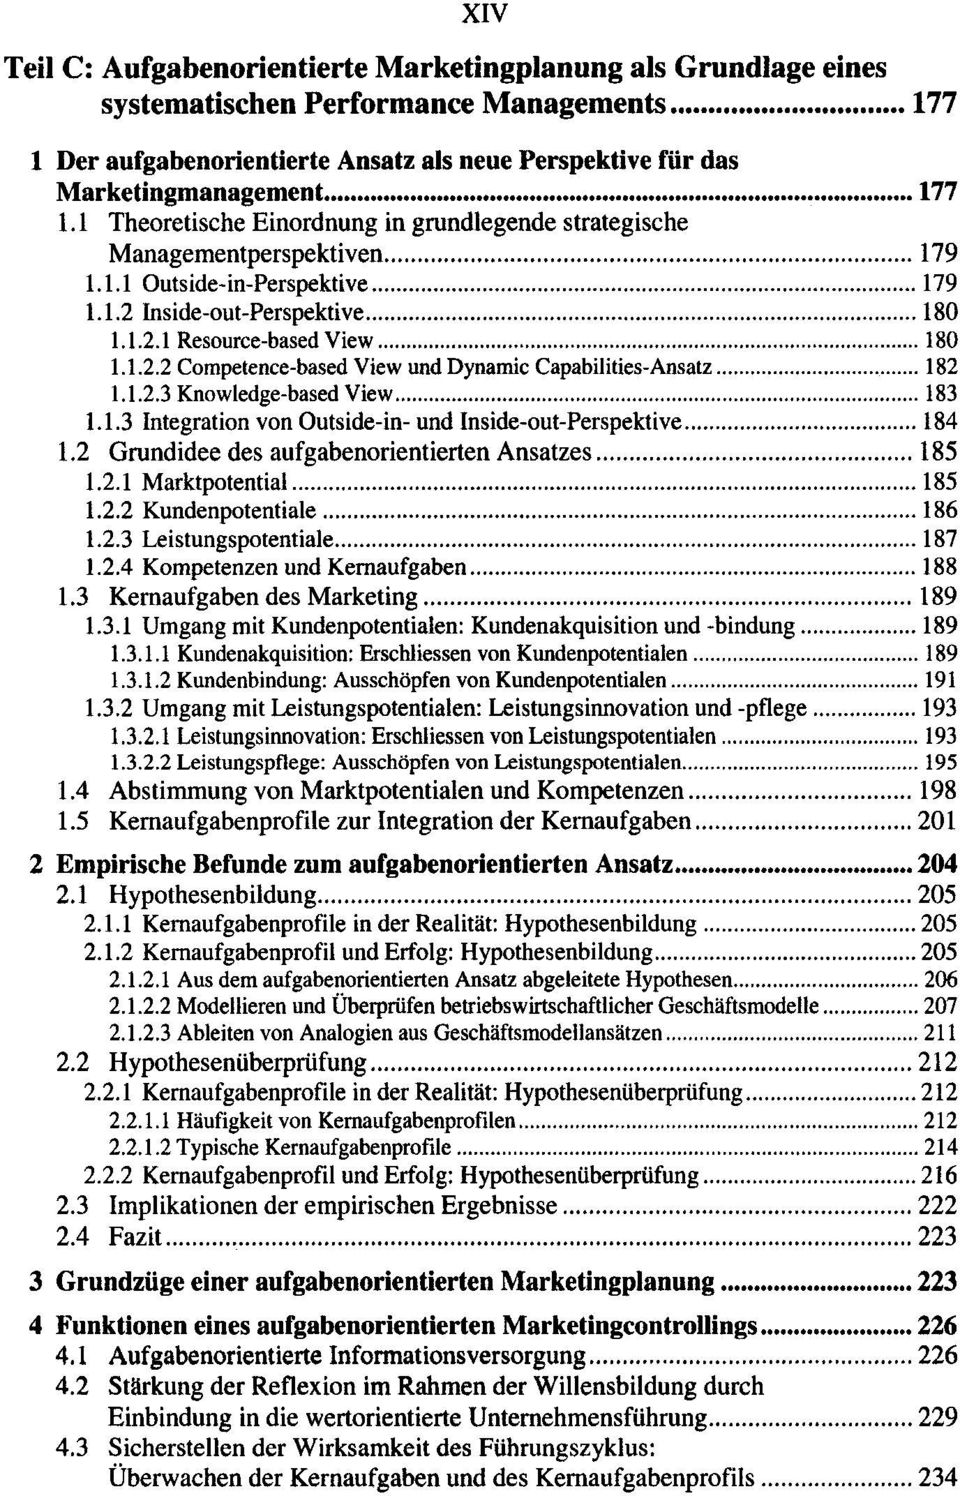 .. 180 1.1.2.2 Competence-based View und Dynamic Capabilities-Ansatz... 182 1.1.2.3 Knowledge-based View... 183 1.1.3 Integration von Outside-in- und Inside-out-Perspektive... 184 1.